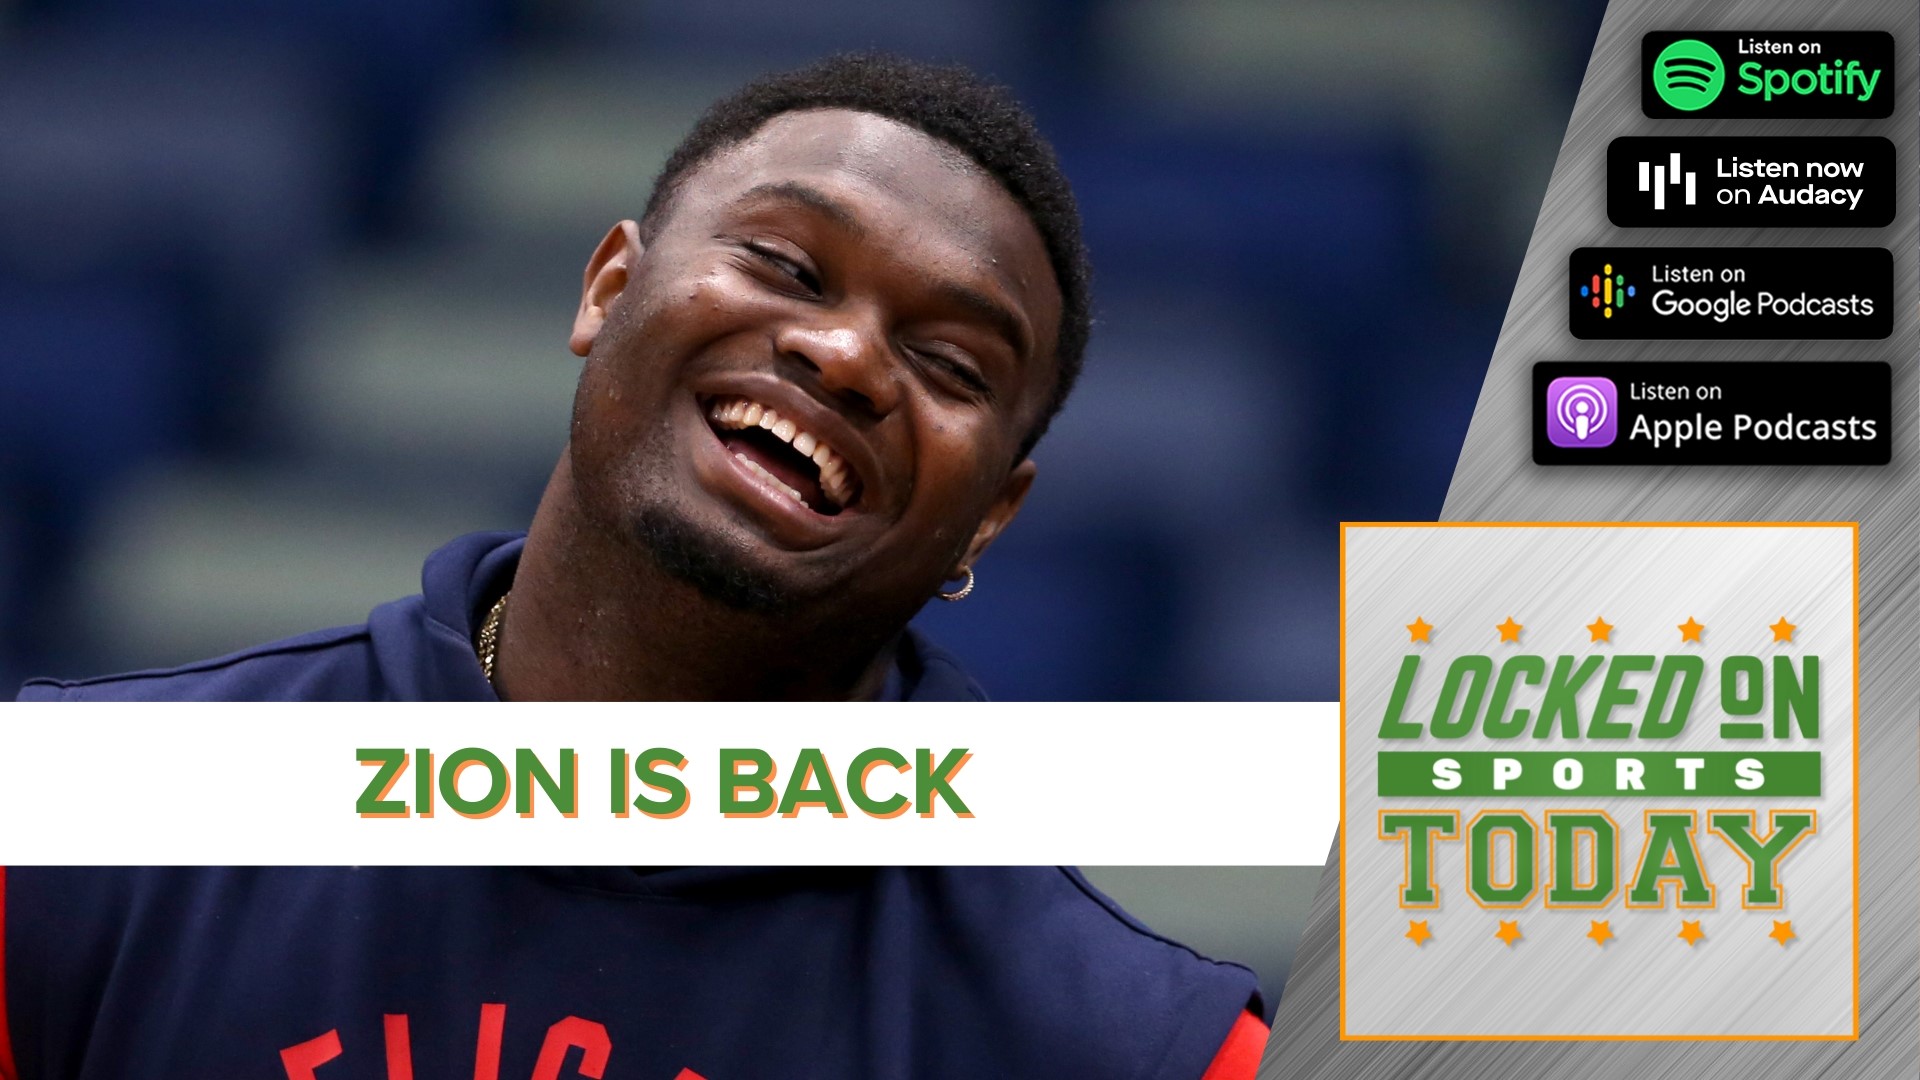 Discussing the day's top sports stories from Zion's return to the Pelicans to what the next NBA season could bring to teams looking for a championship.